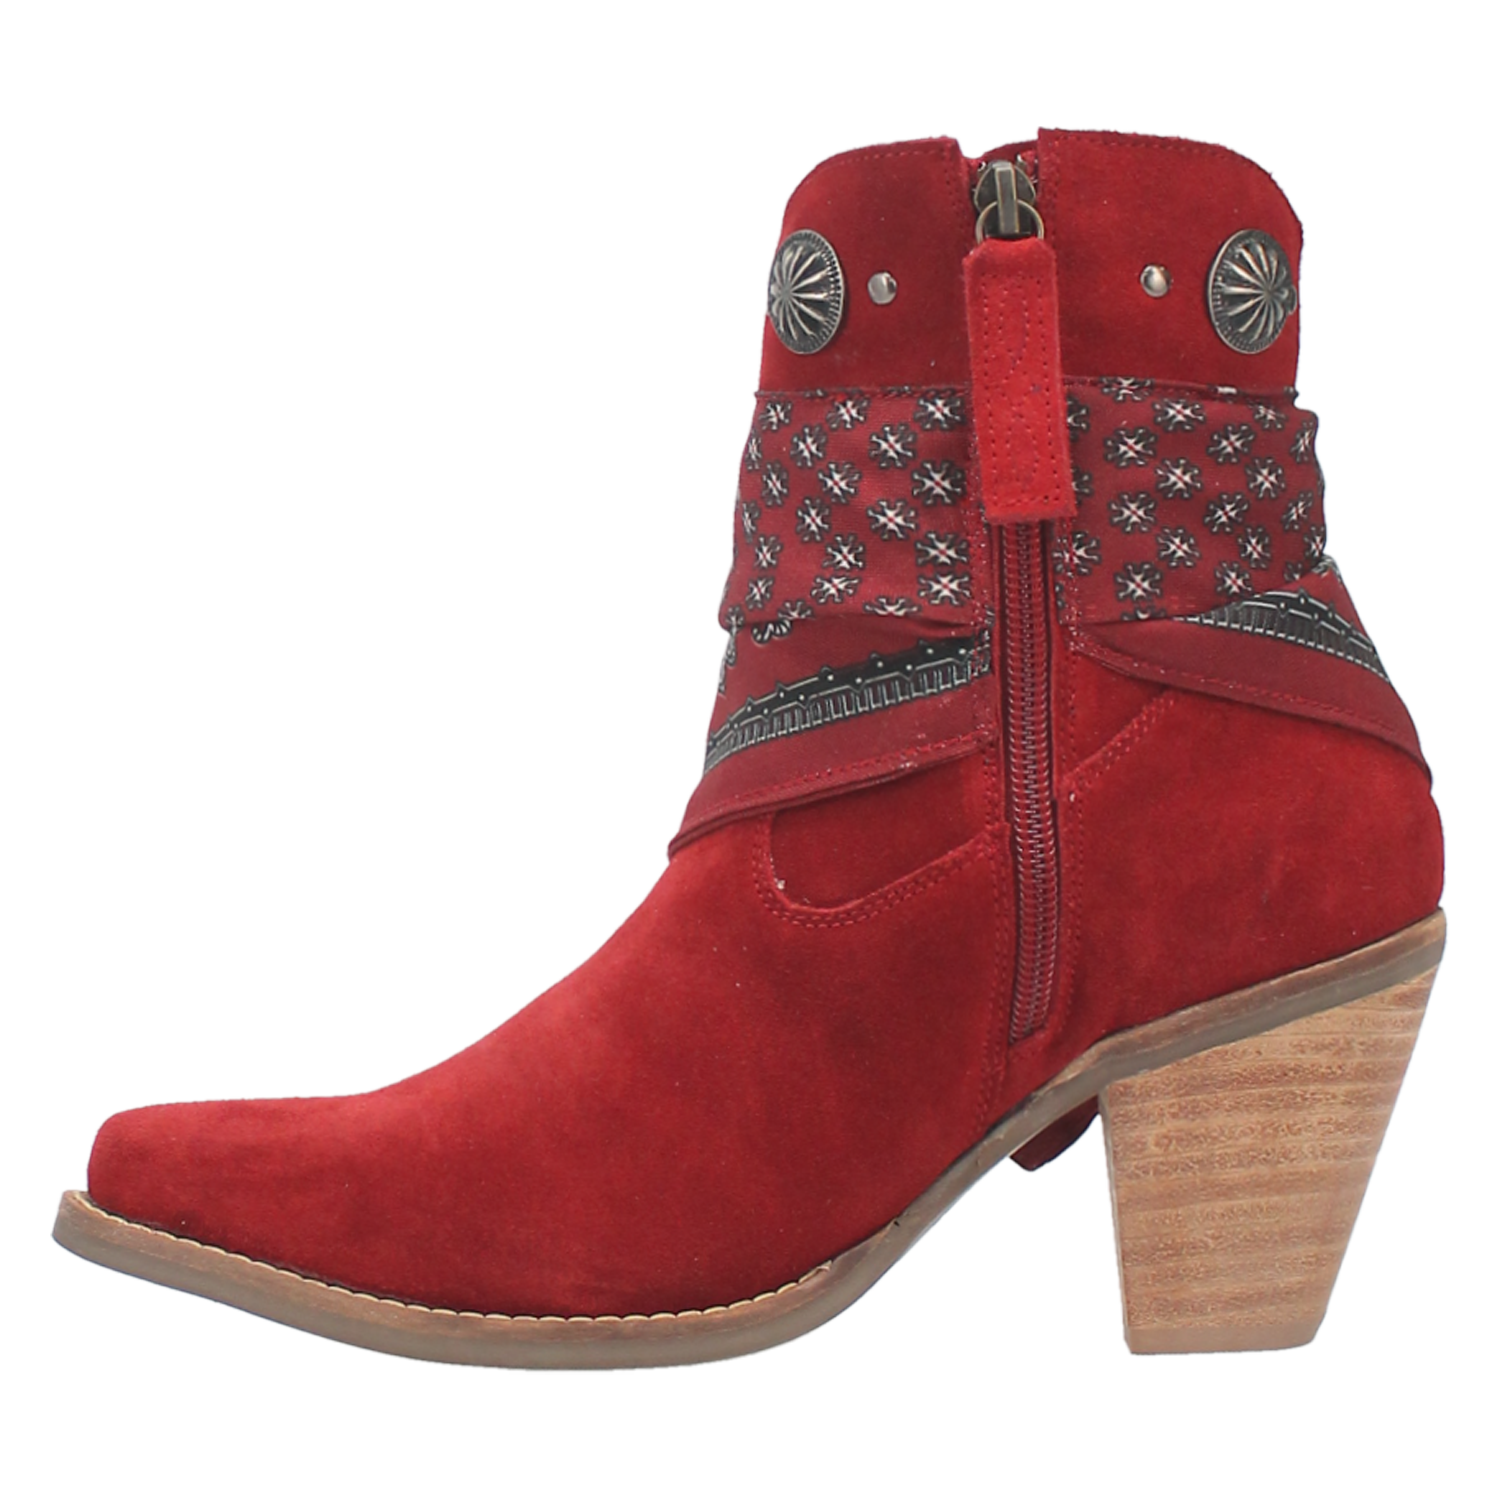 Bandida Red Suede Silver Concho Bandana Wrapped Booties (DS)